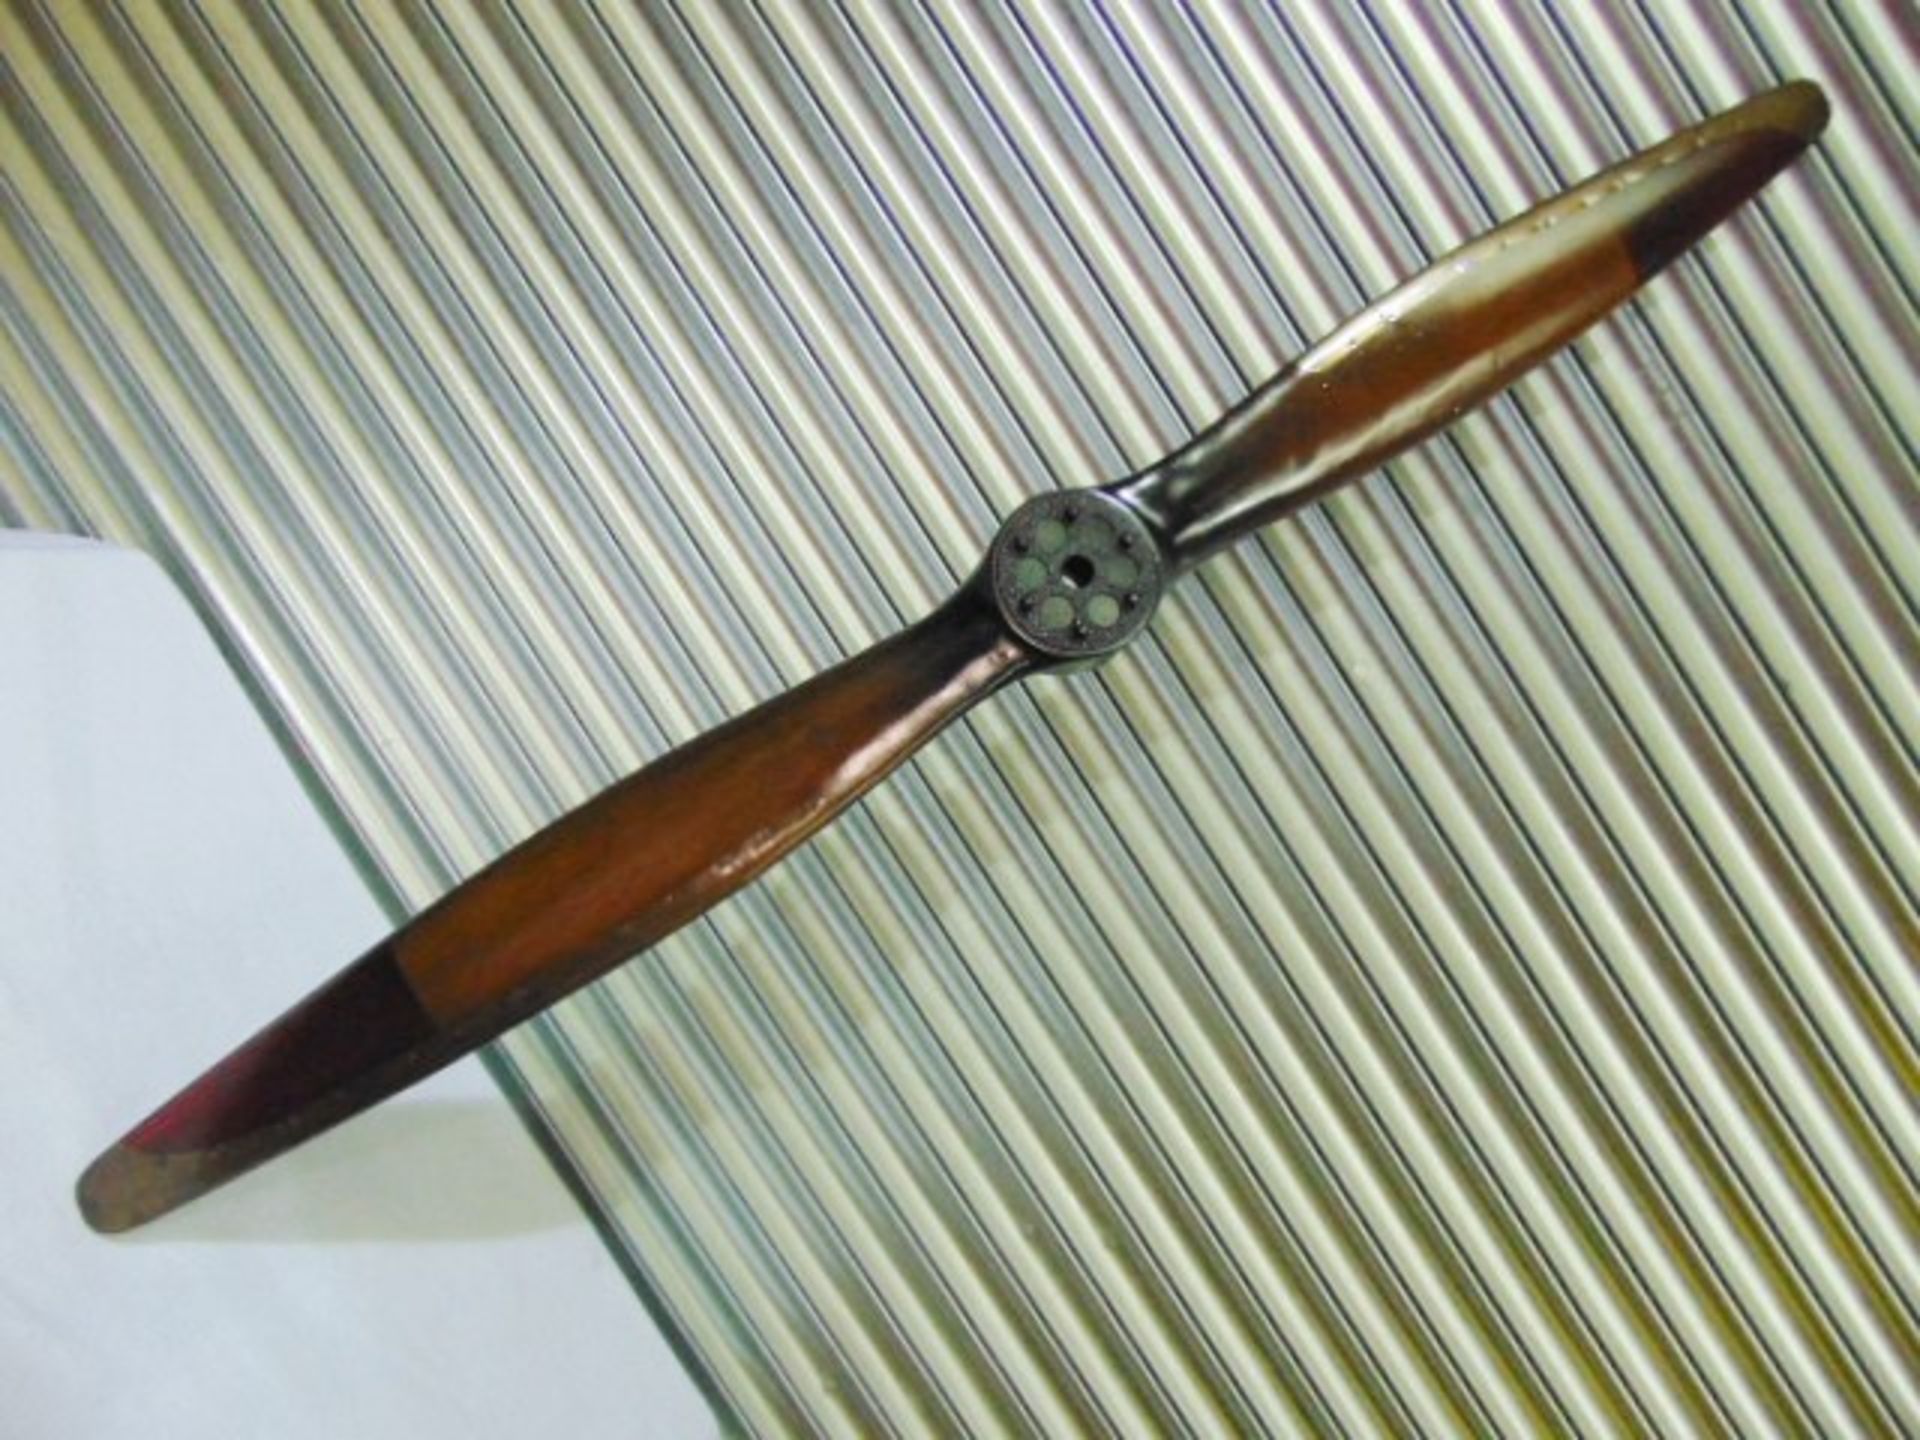 Metal Clad Wooden Aircraft Propeller - Image 2 of 4